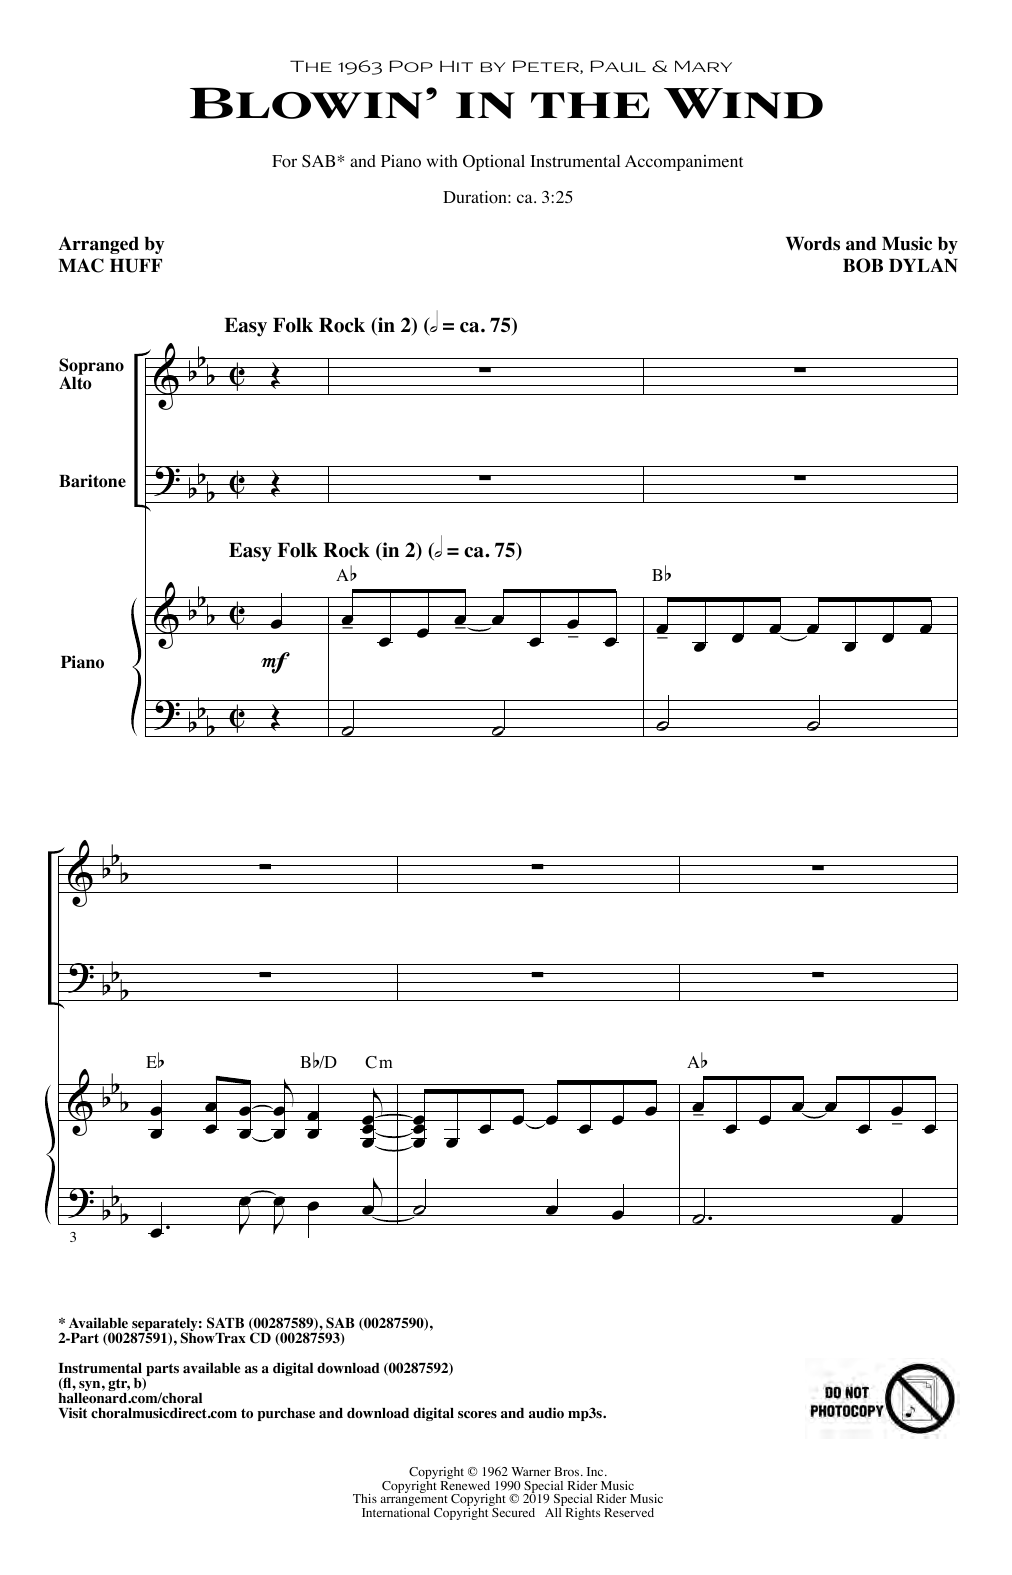 Download Peter, Paul & Mary Blowin' In The Wind (arr. Mac Huff) Sheet Music